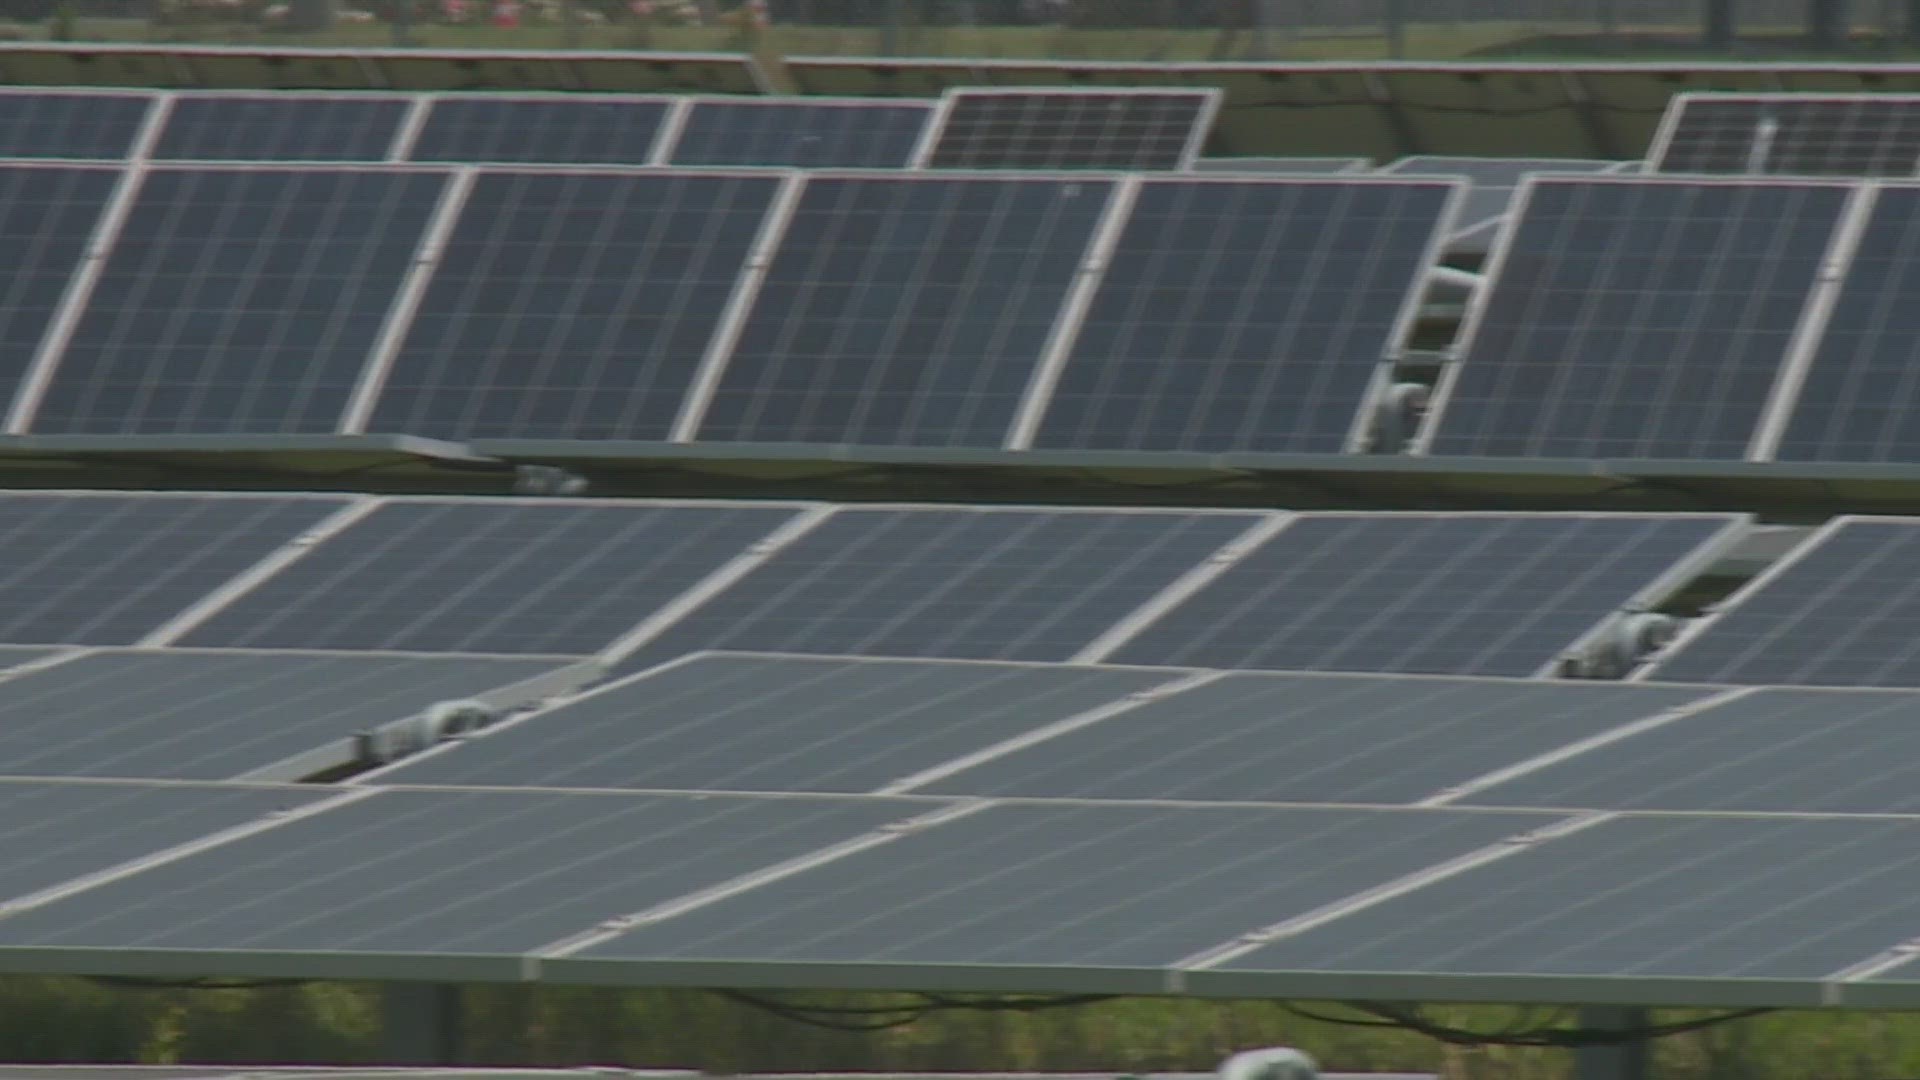 Entergy’s New Orleans Solar Station, also known as NOSS, sits on about 100 acres of previously undeveloped land at Michoud.